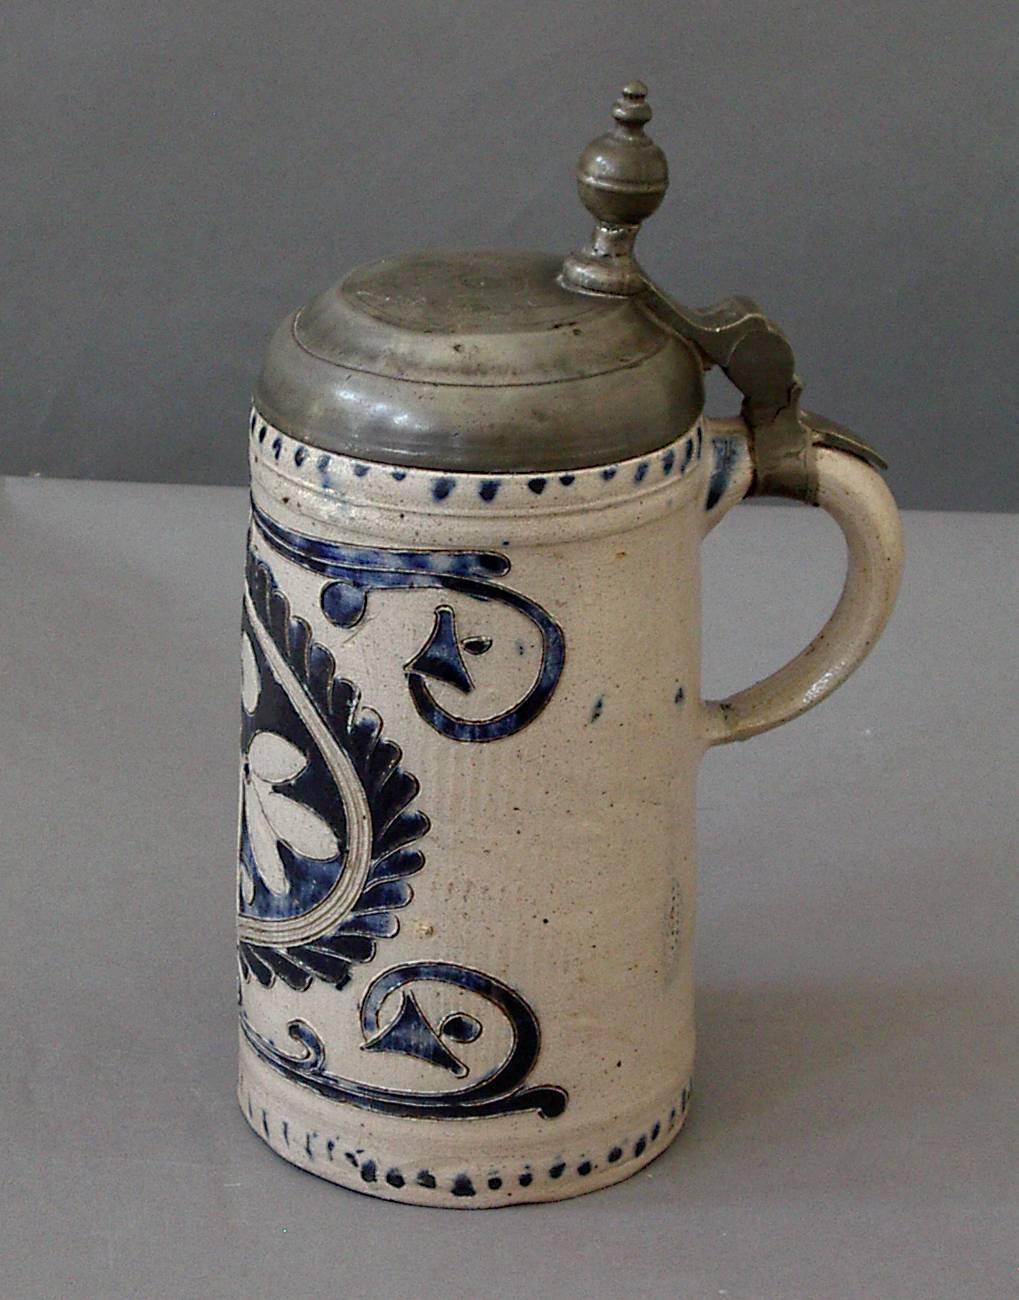 German stoneware tankard decorated with incised cartouche and swags, filled with cobalt glaze. Bottom shows the coil construction. Westerwald, 18th century. Pewter cover with finial-shaped thumb latch.